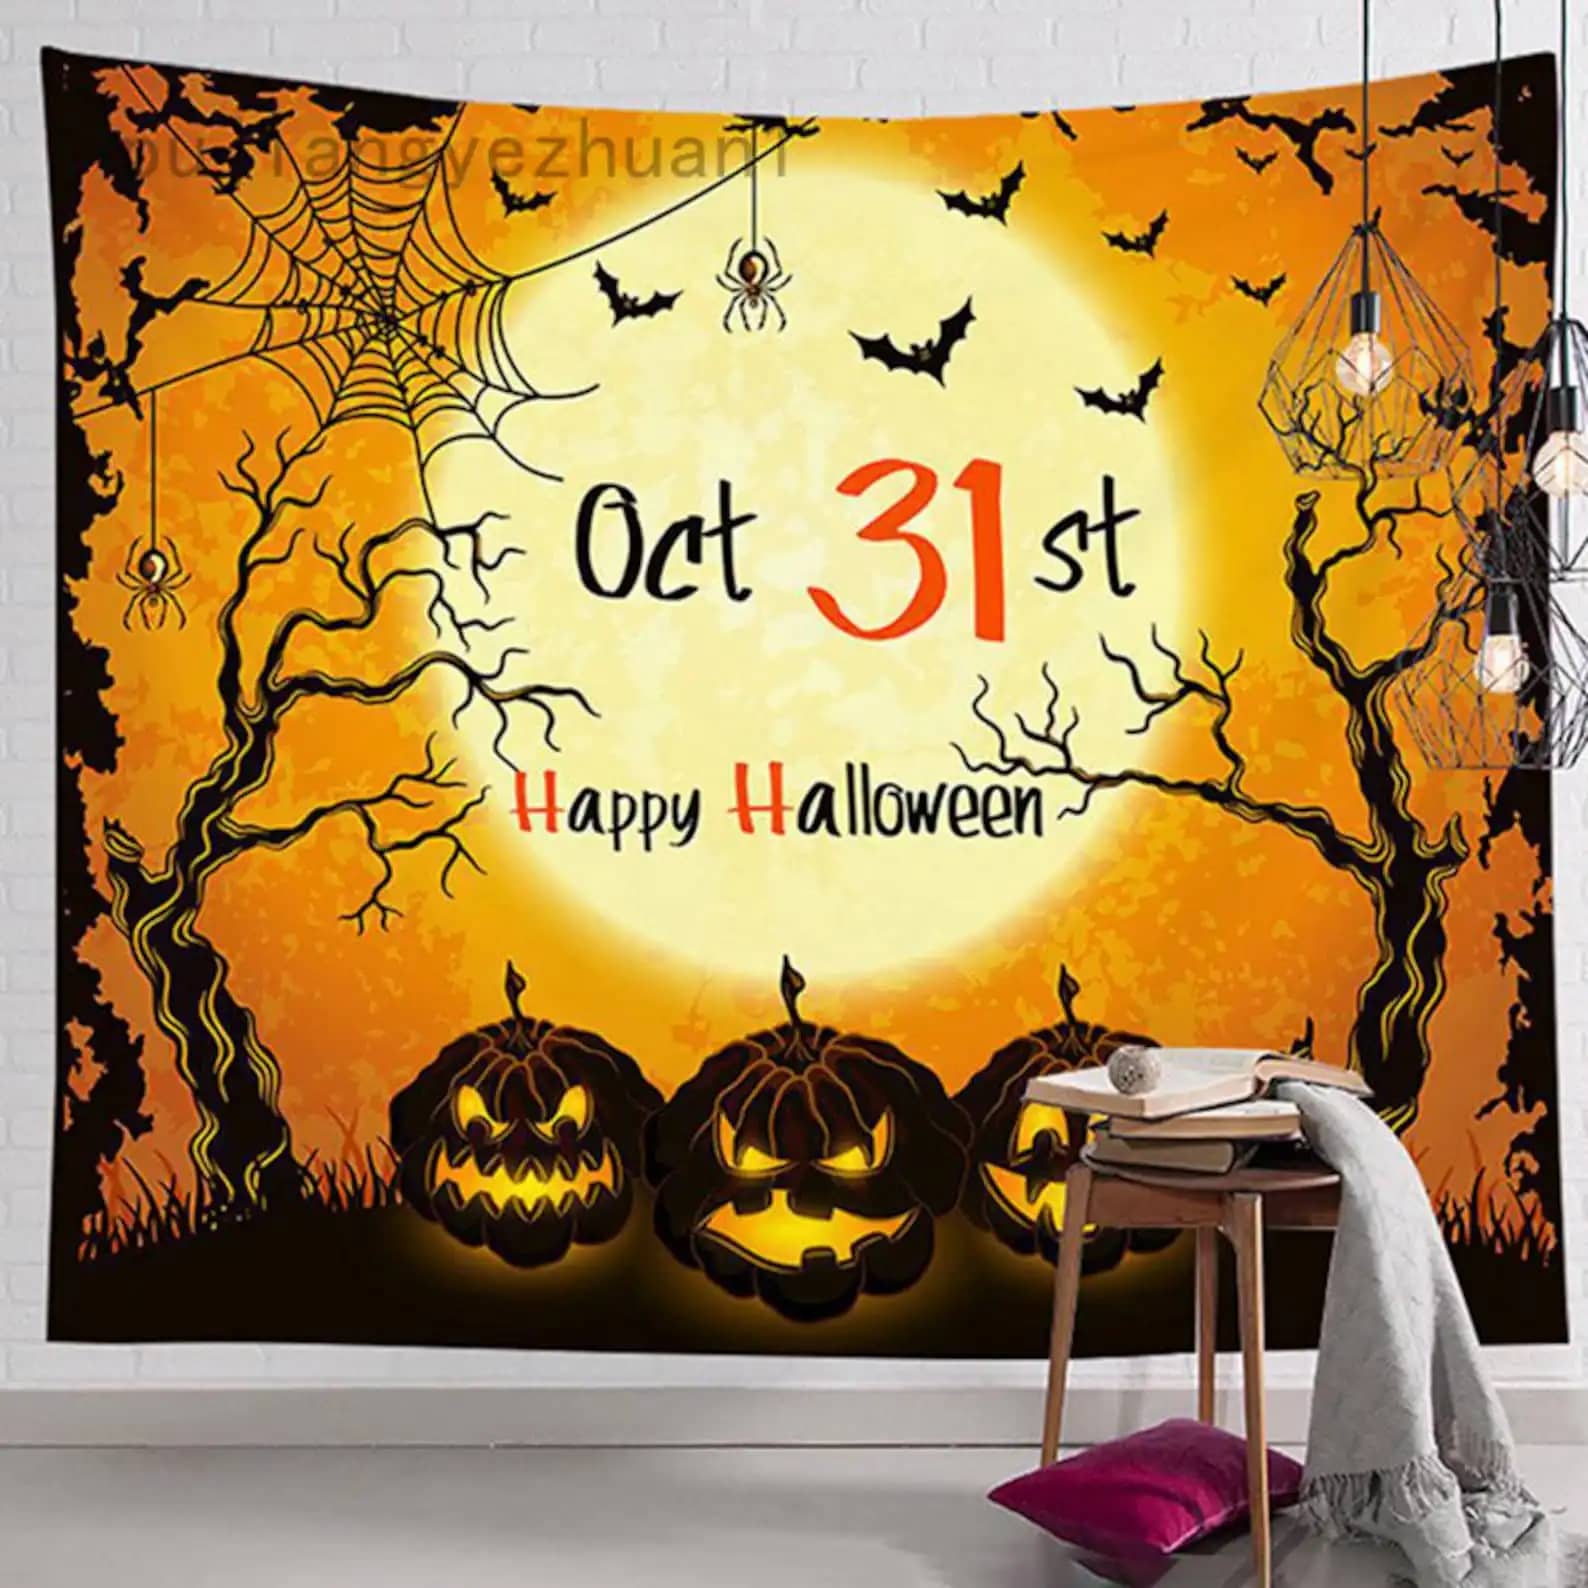 Happy Halloween October 31St Wall Art Decor Halloween Gifts Tapestry